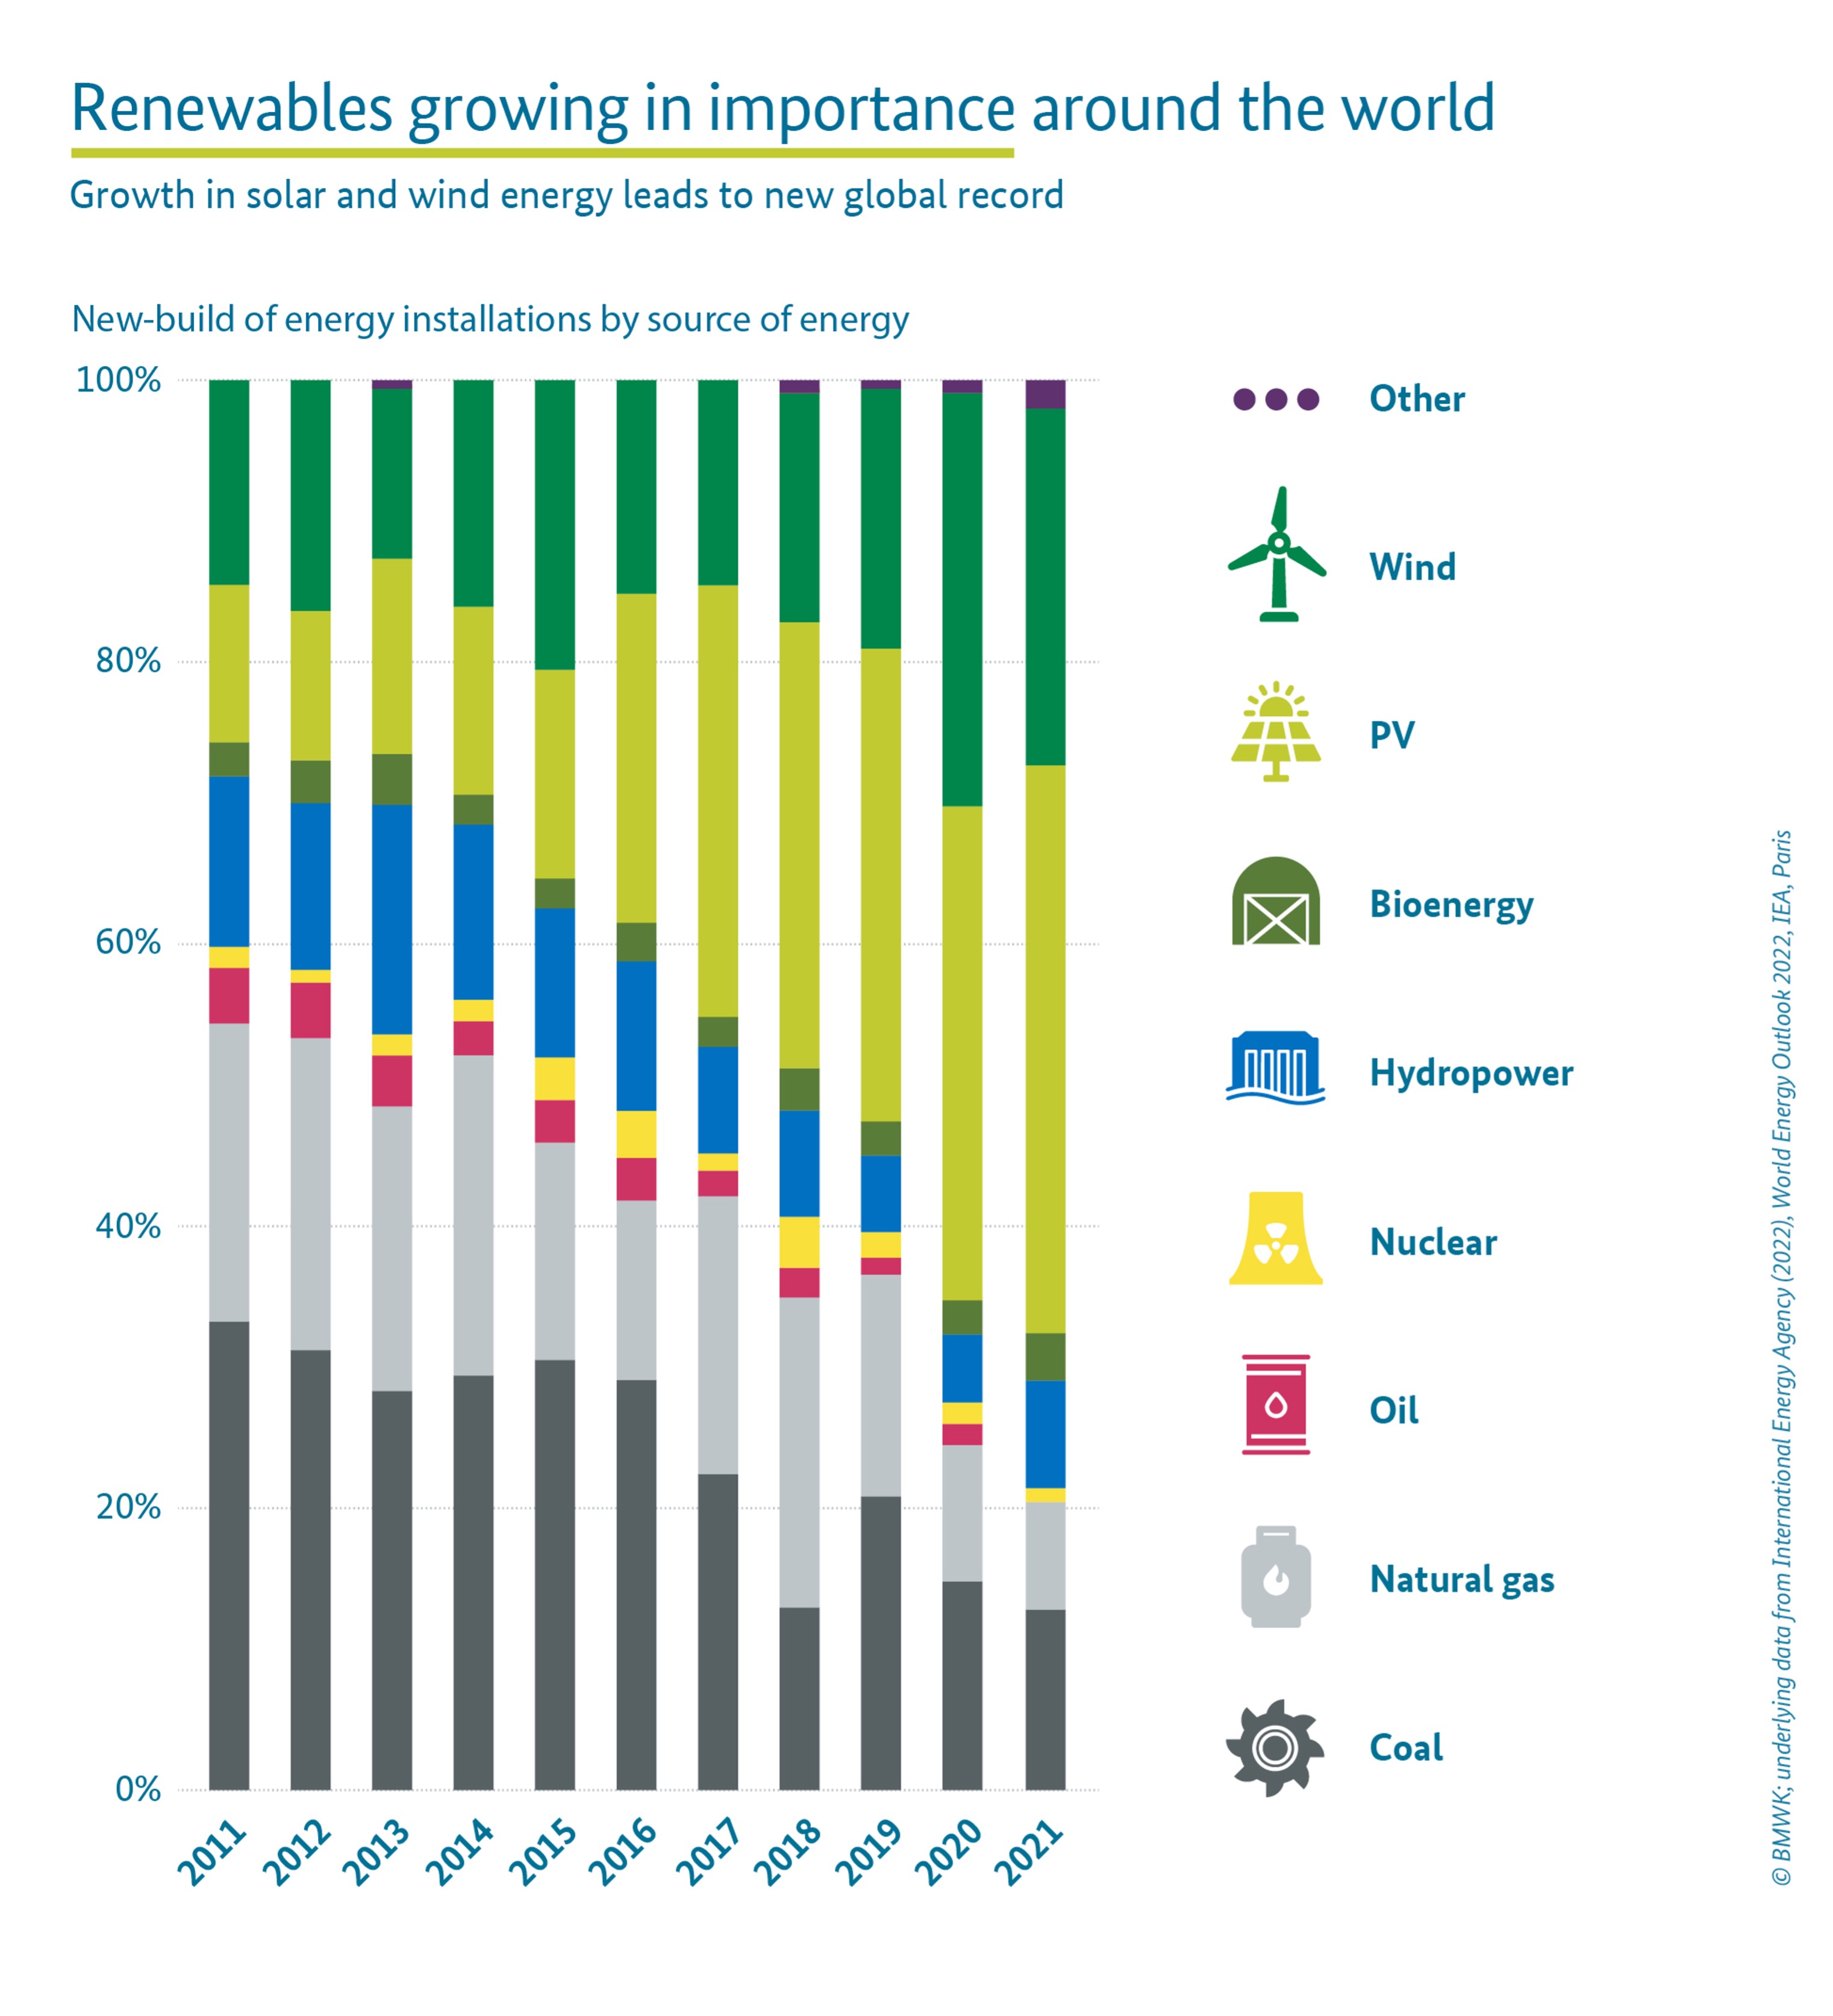 Renewables growing in importance around the world graphic